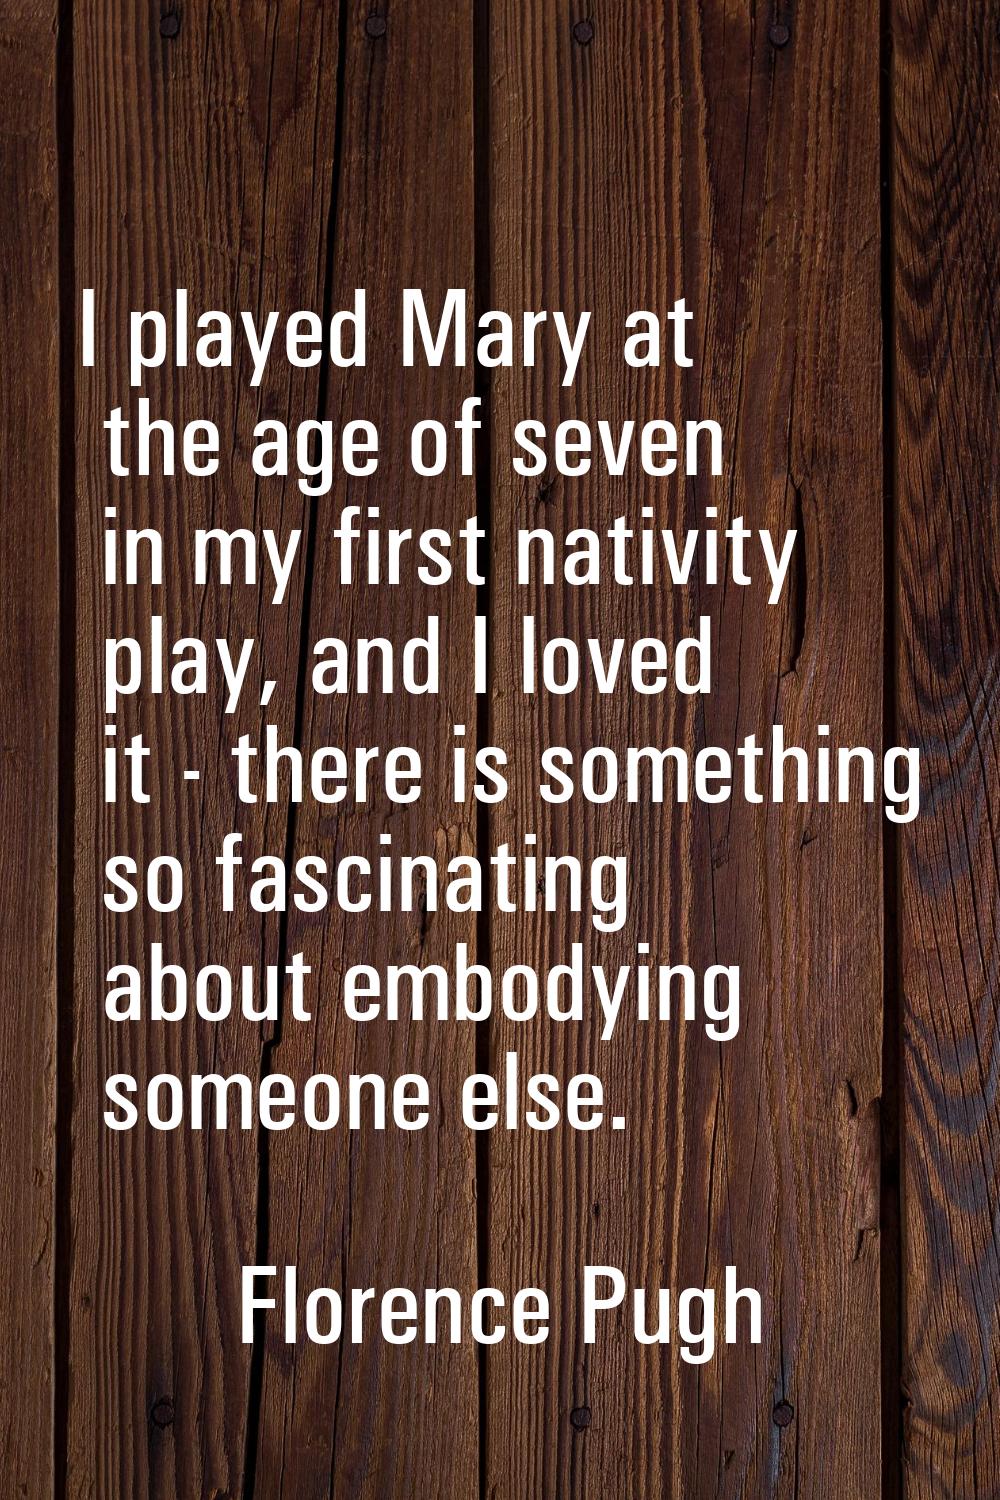 I played Mary at the age of seven in my first nativity play, and I loved it - there is something so